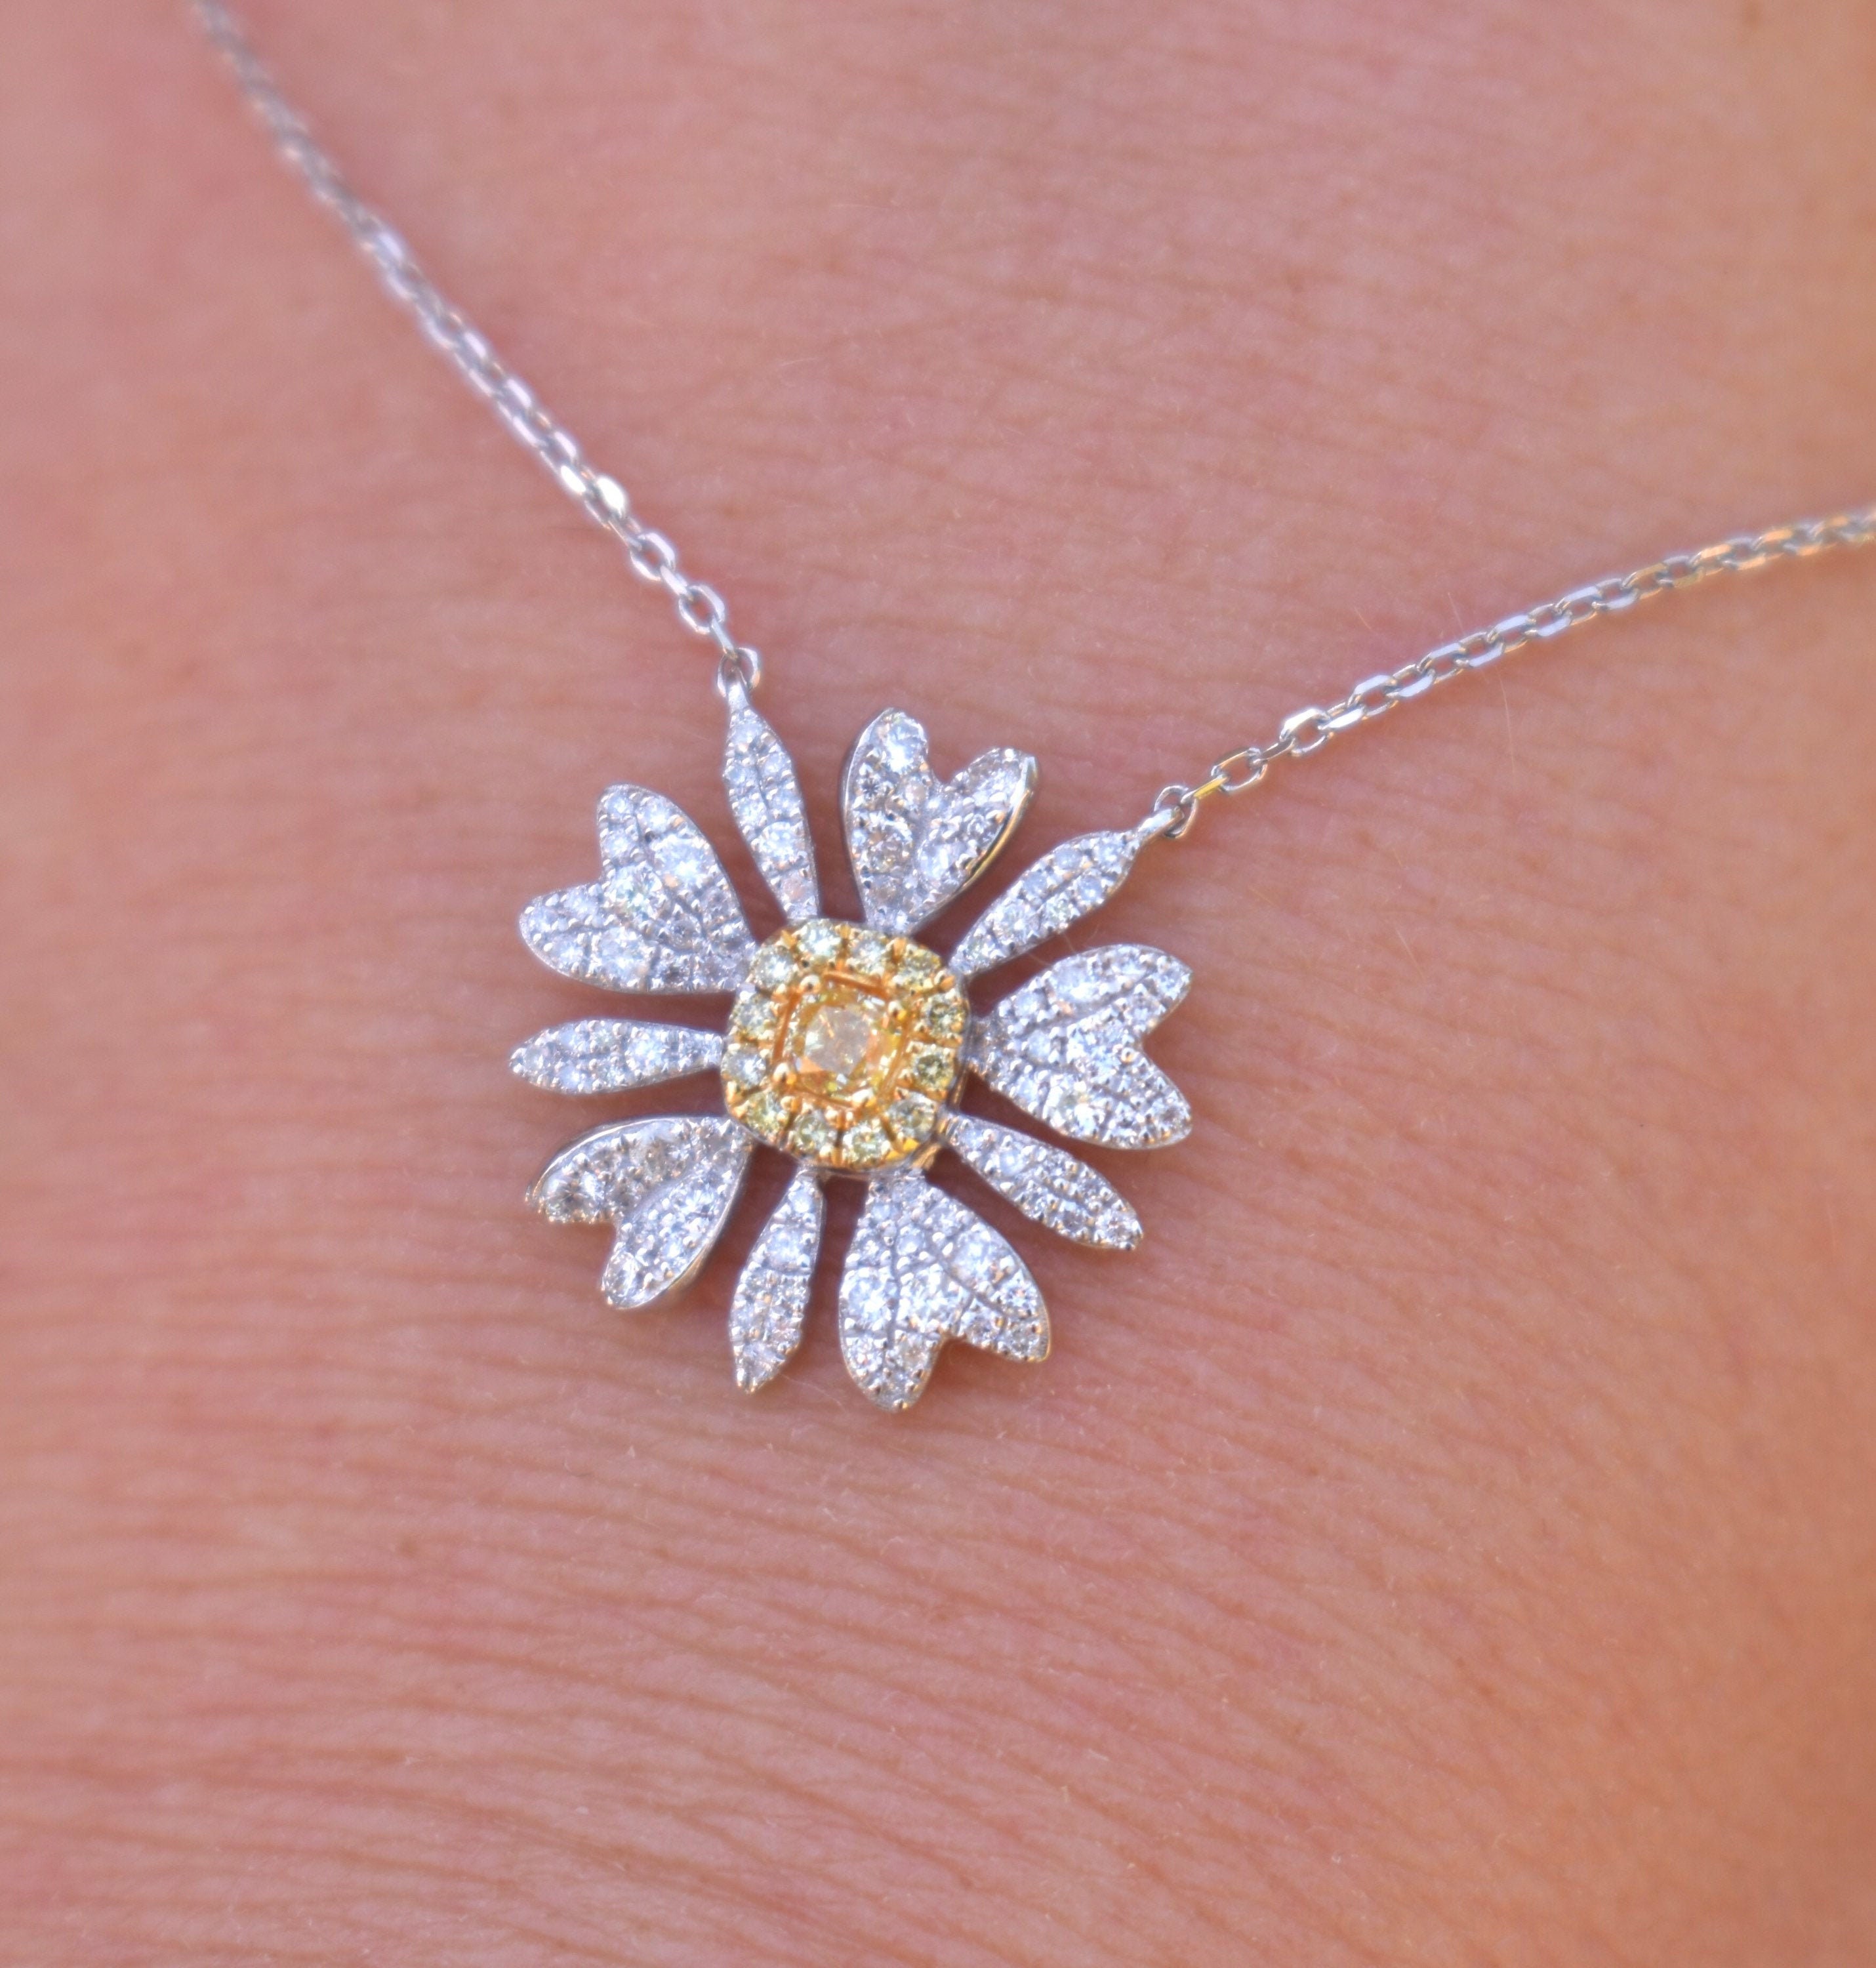 Necklace Daisy Flower With Diamond And Leaf - MRMirabelle